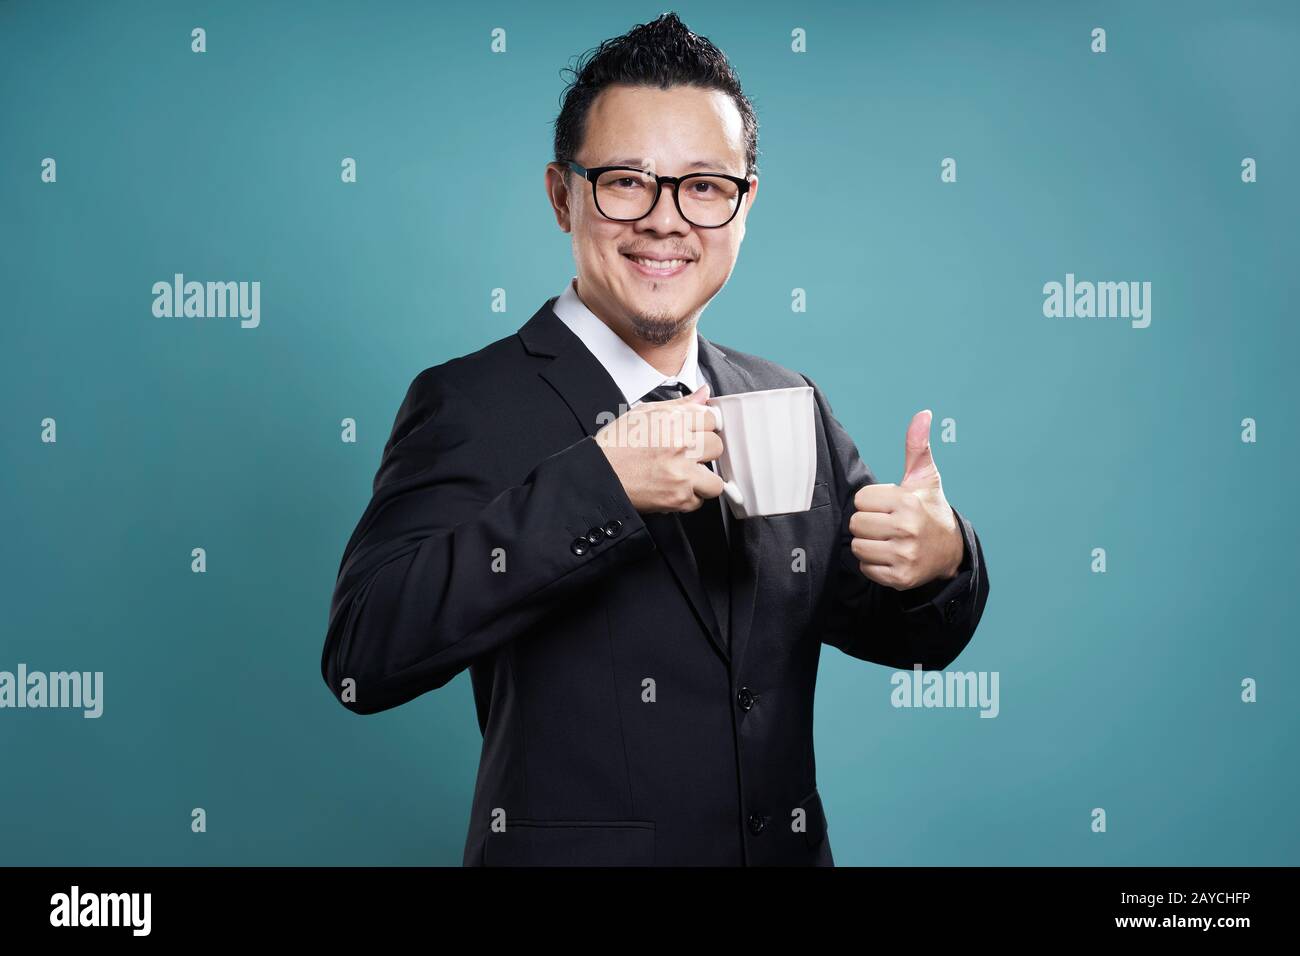 Businessman in suit smile and enjoy cup of coffee with thumb up gesture. Stock Photo